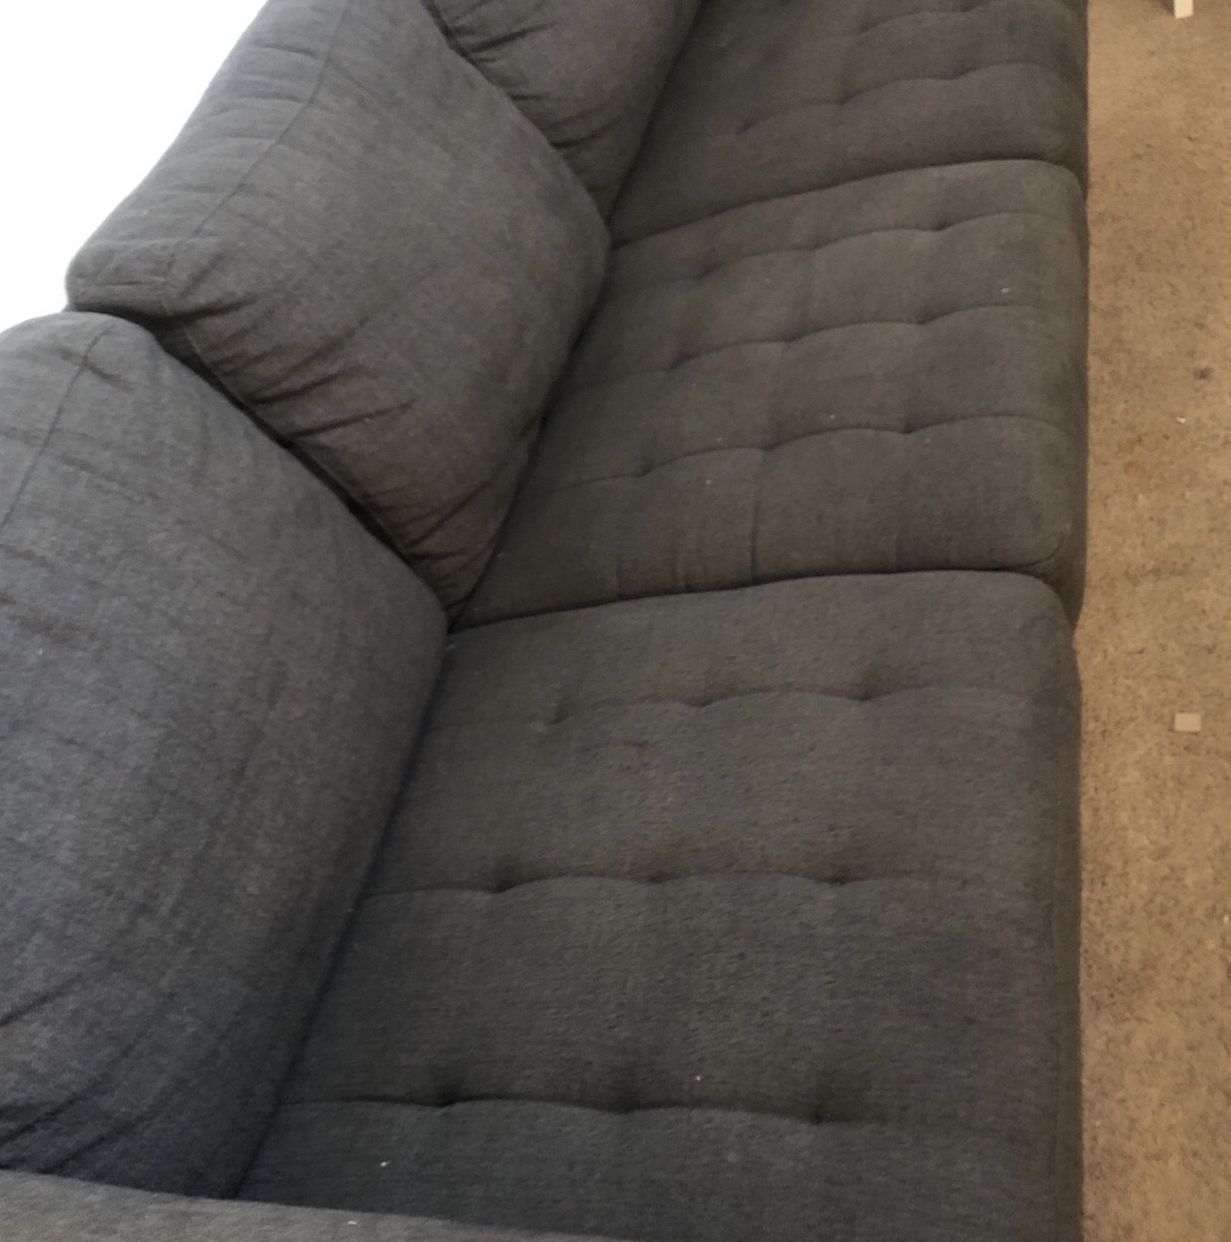 Free Sofa In Good Conditions